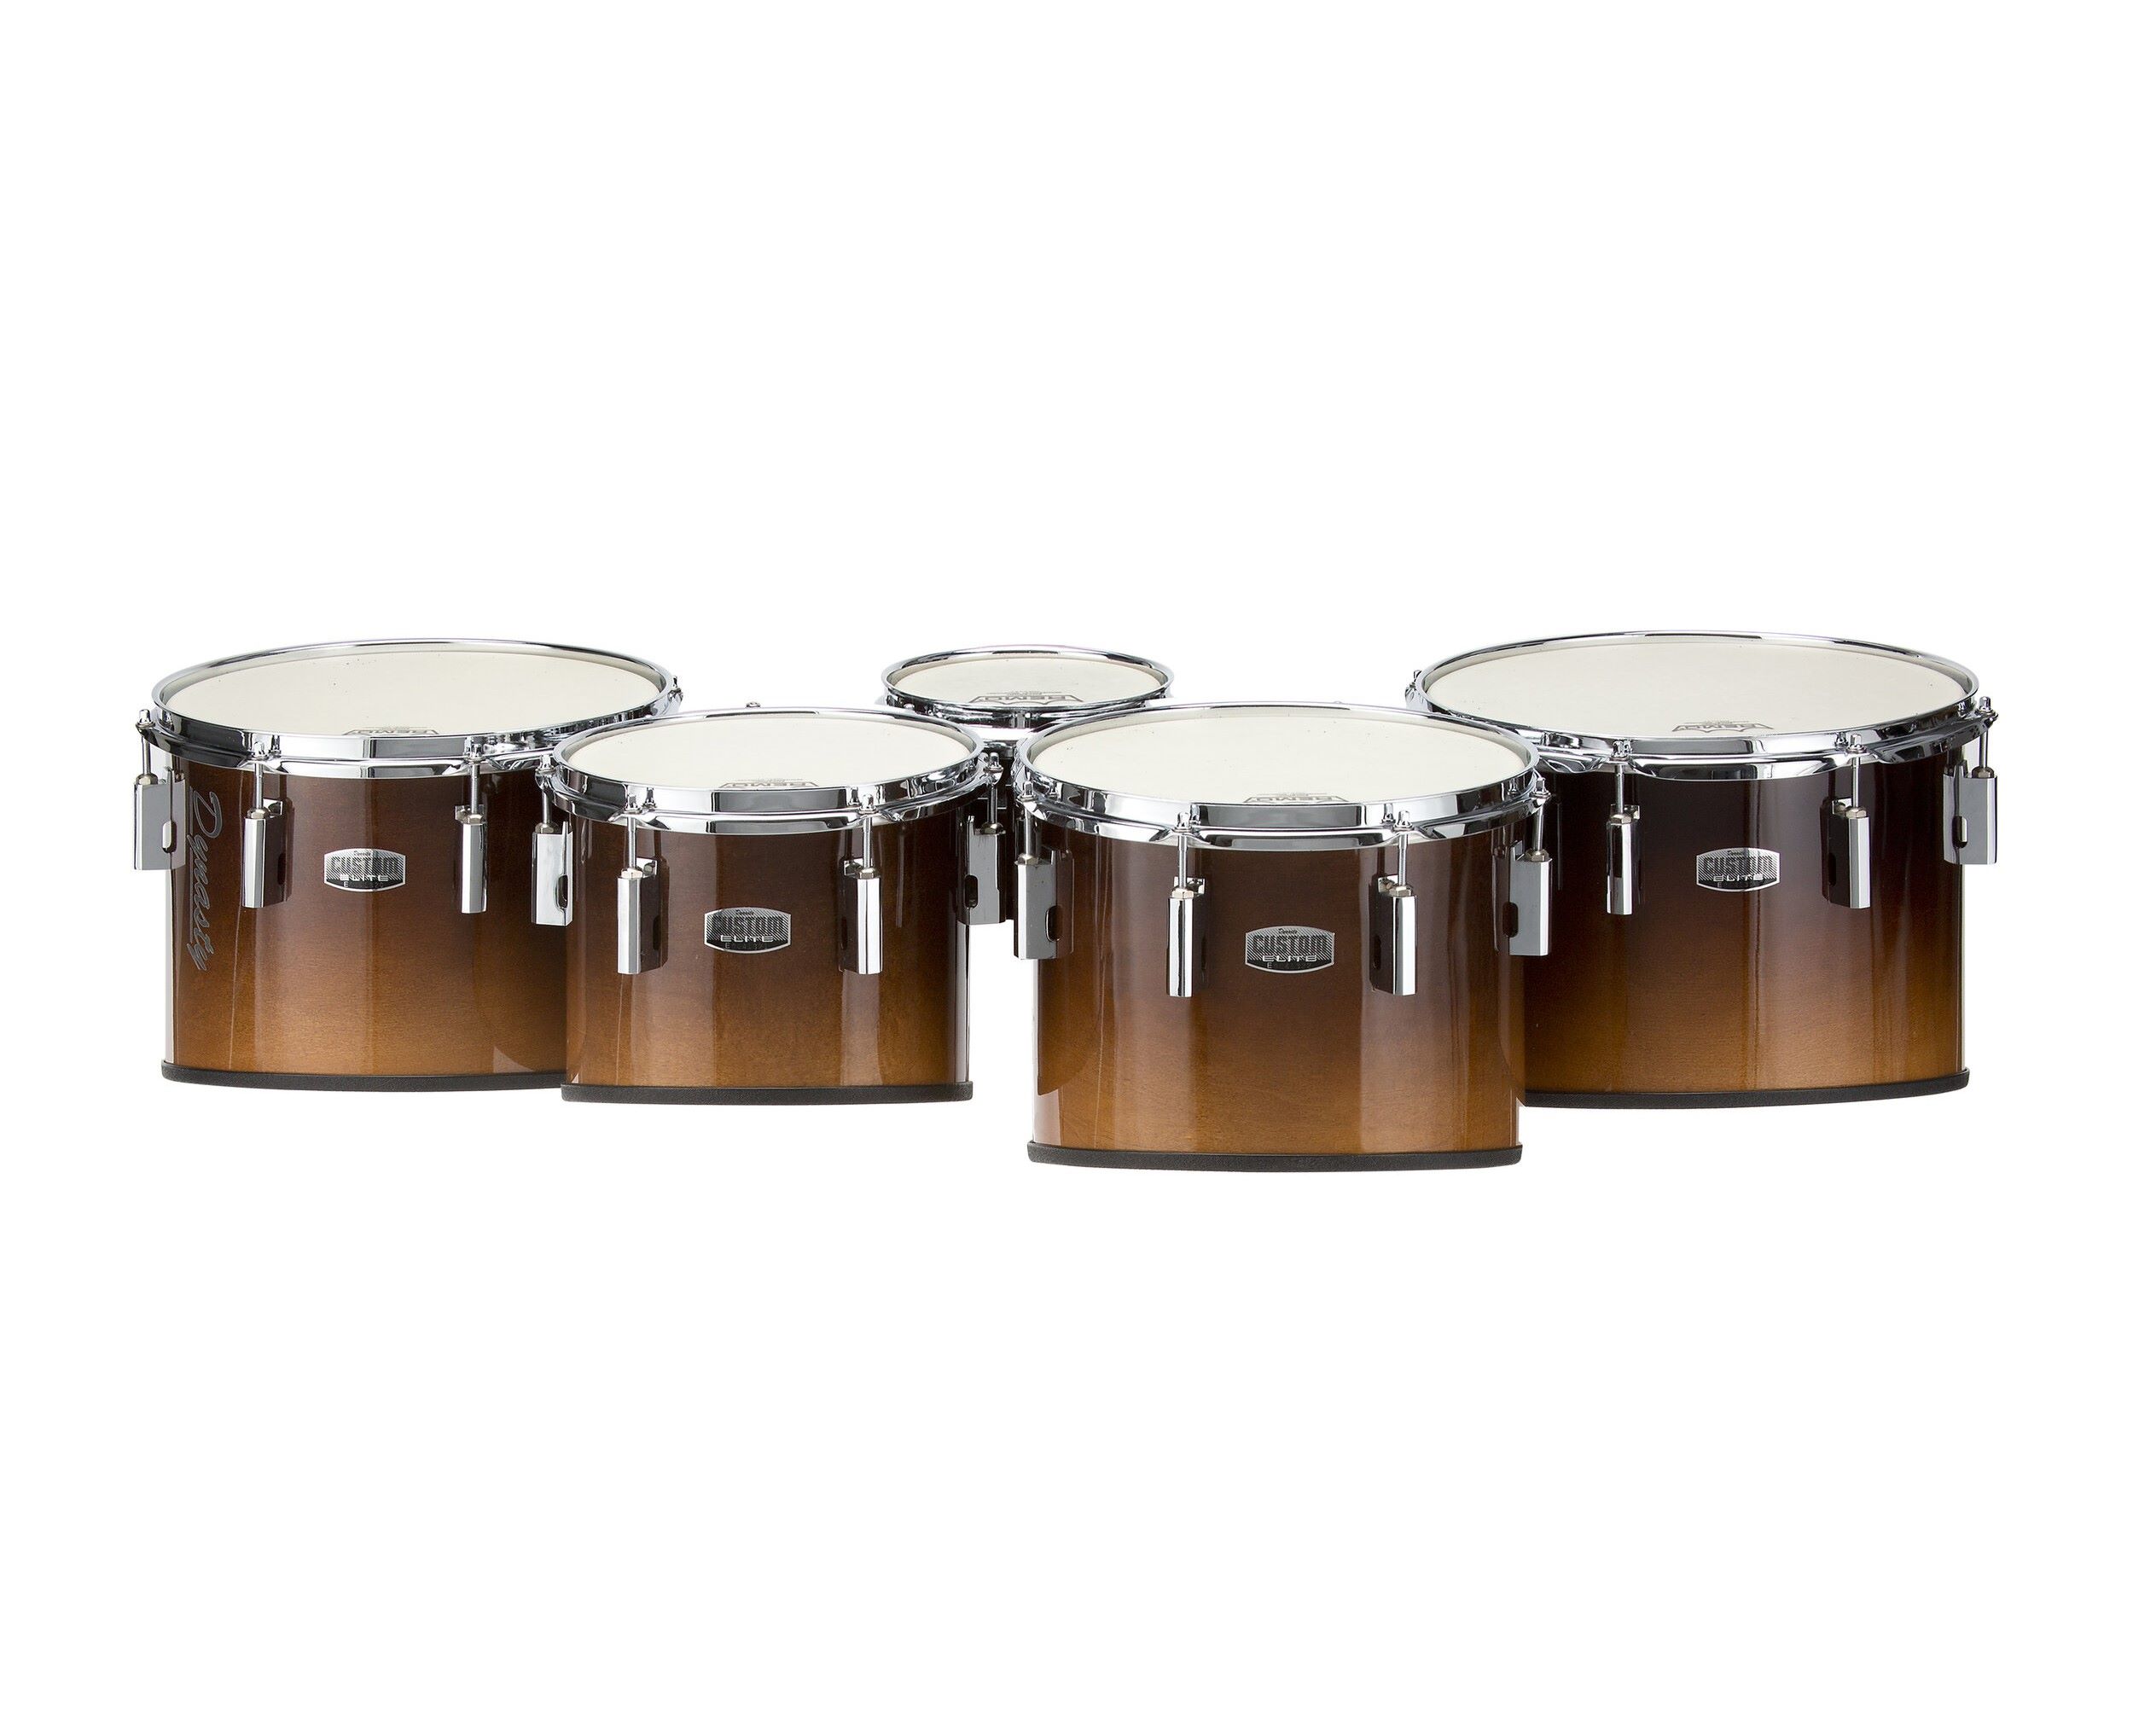 What Are Tenor Drums Tuned To